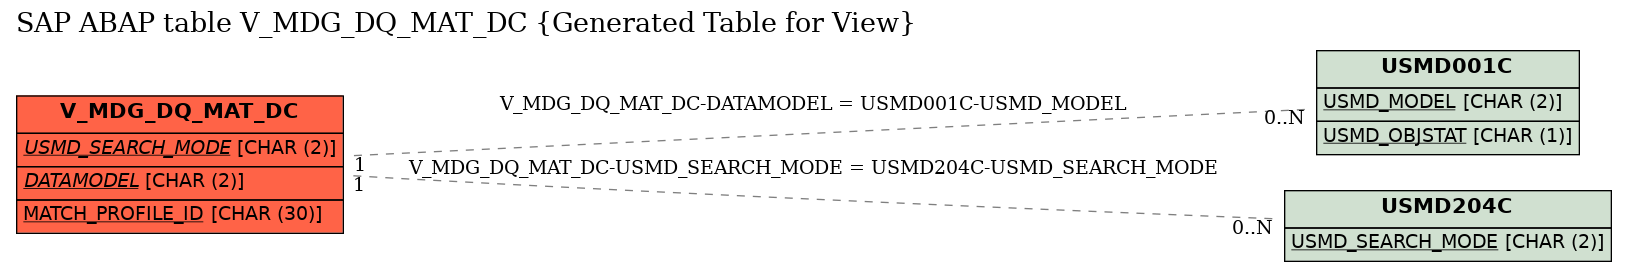 E-R Diagram for table V_MDG_DQ_MAT_DC (Generated Table for View)